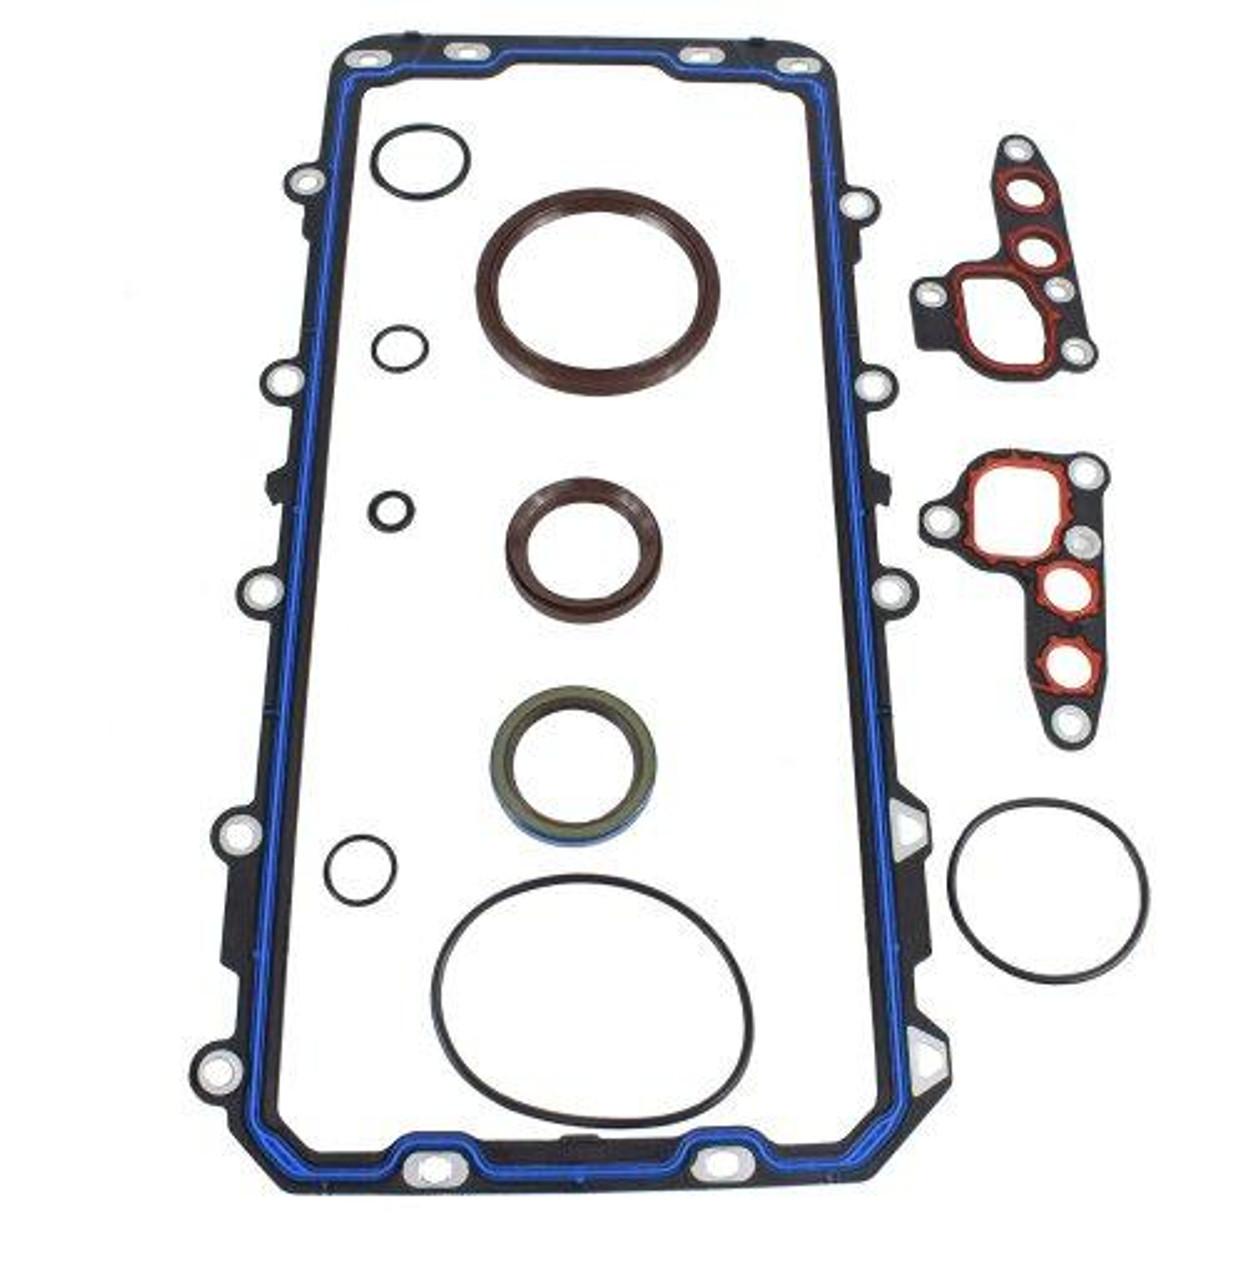 Lower Gasket Set - 2013 Ford Expedition 5.4L Engine Parts # LGS4150ZE172